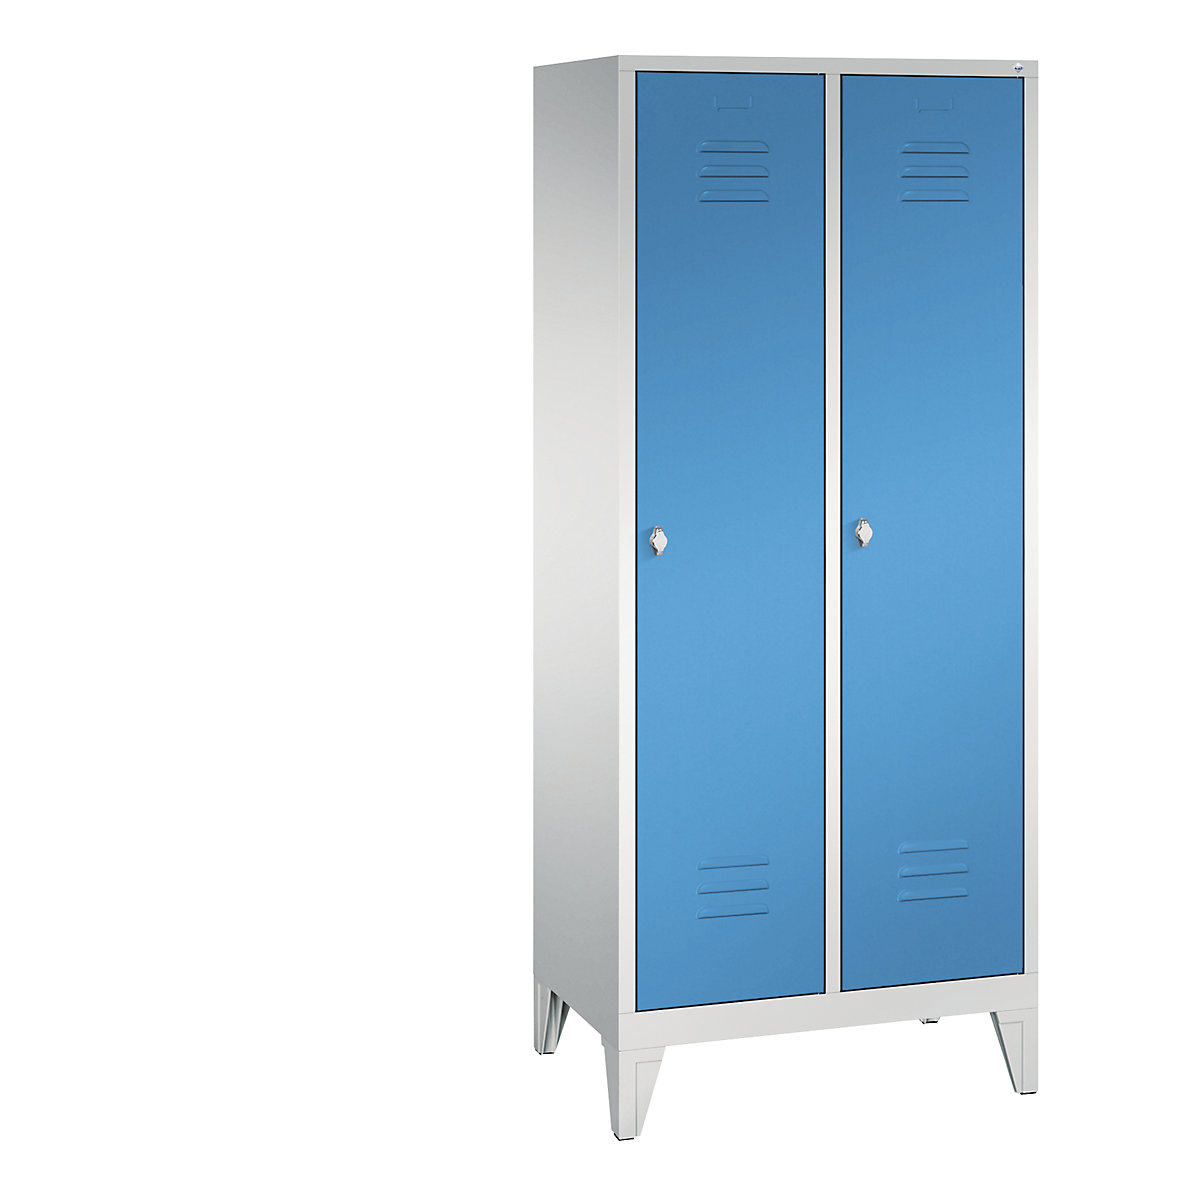 CLASSIC cloakroom locker with feet – C+P, 2 compartments, compartment width 400 mm, light grey / light blue-14